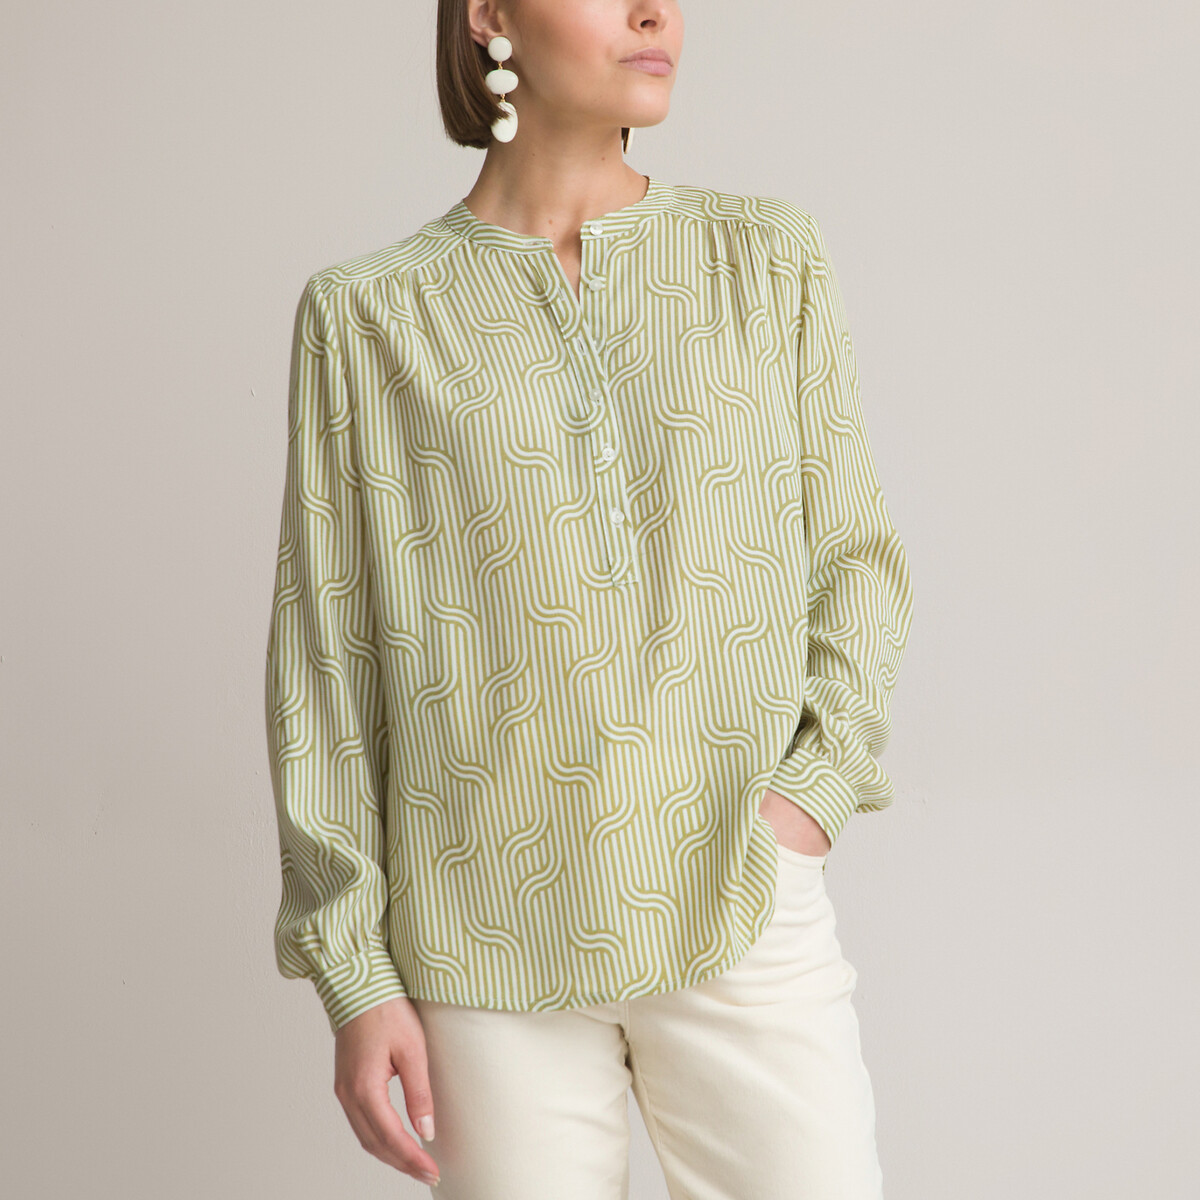 Graphic Print Blouse with Crew Neck and Long Sleeves